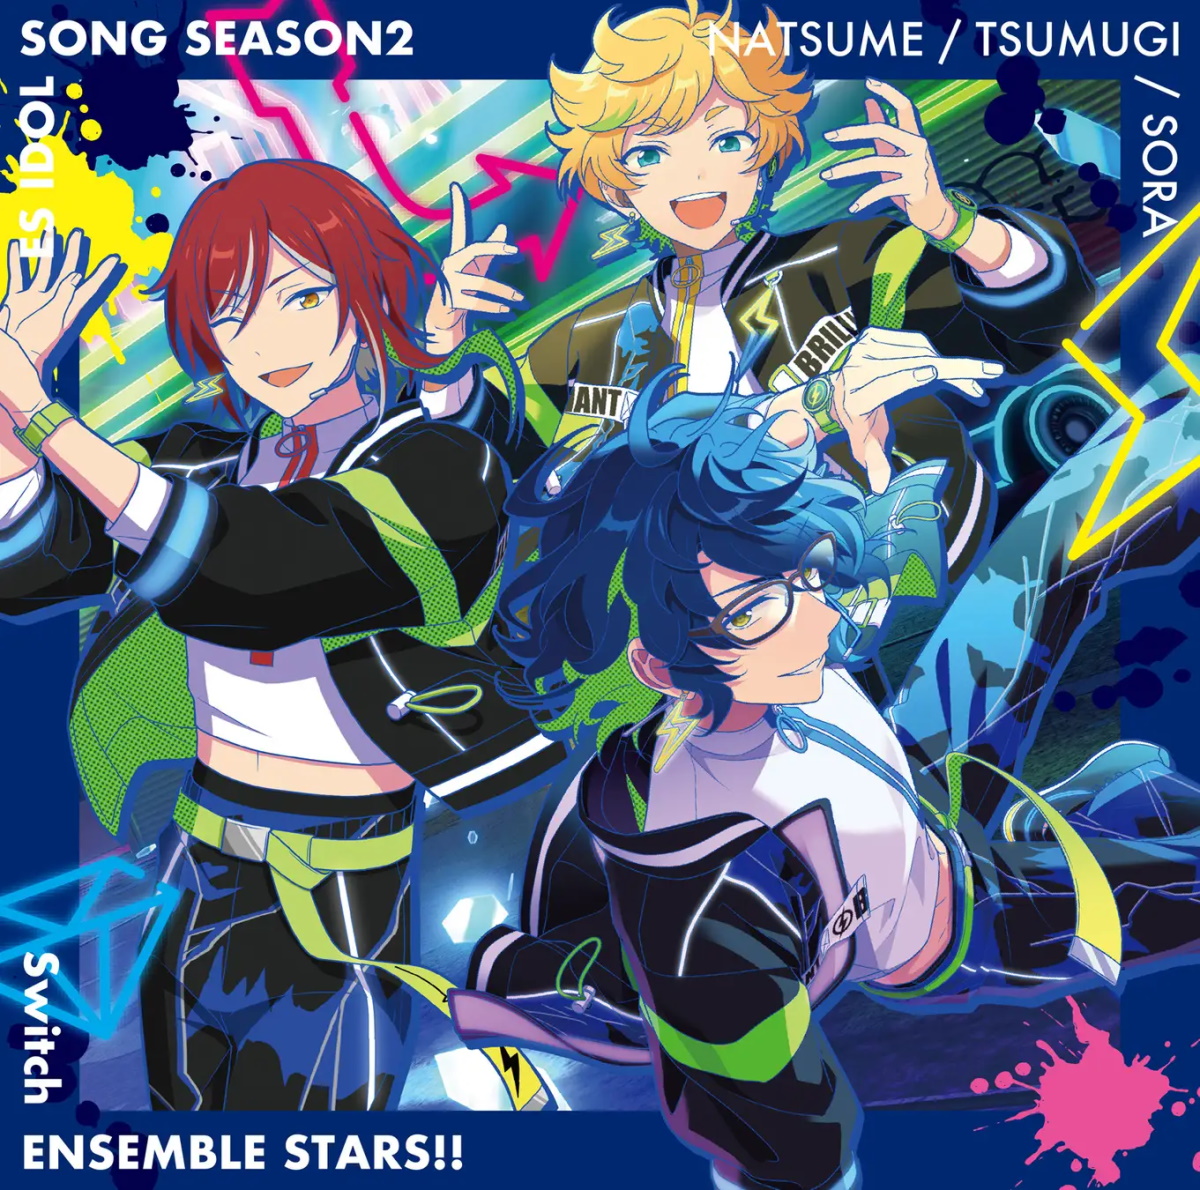 Cover art for『Switch - Brilliant Smile』from the release『Ensemble Stars!! ES Idol Song season2 Brilliant Smile